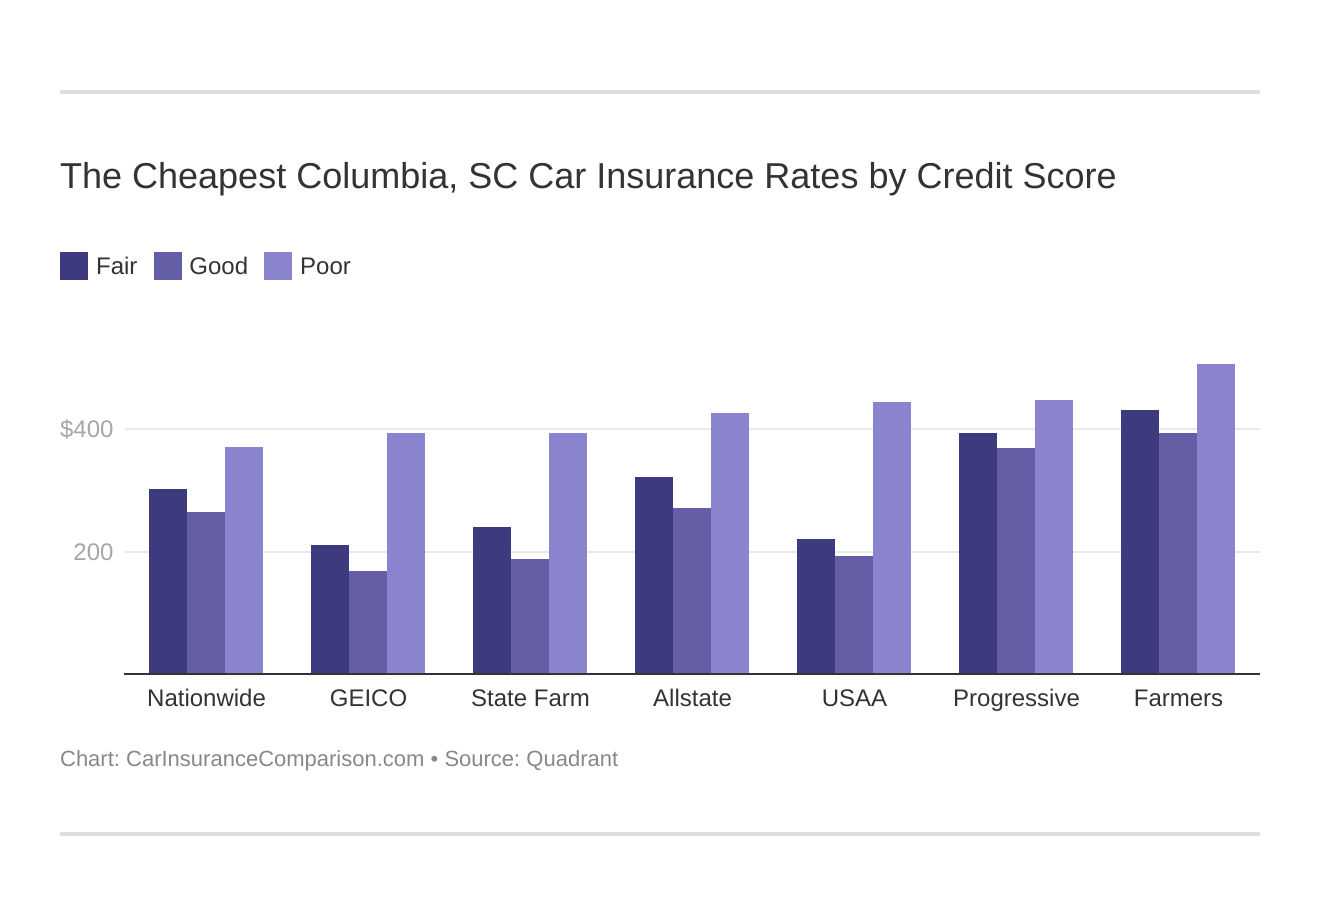 The Cheapest Columbia, SC Car Insurance Rates by Credit Score